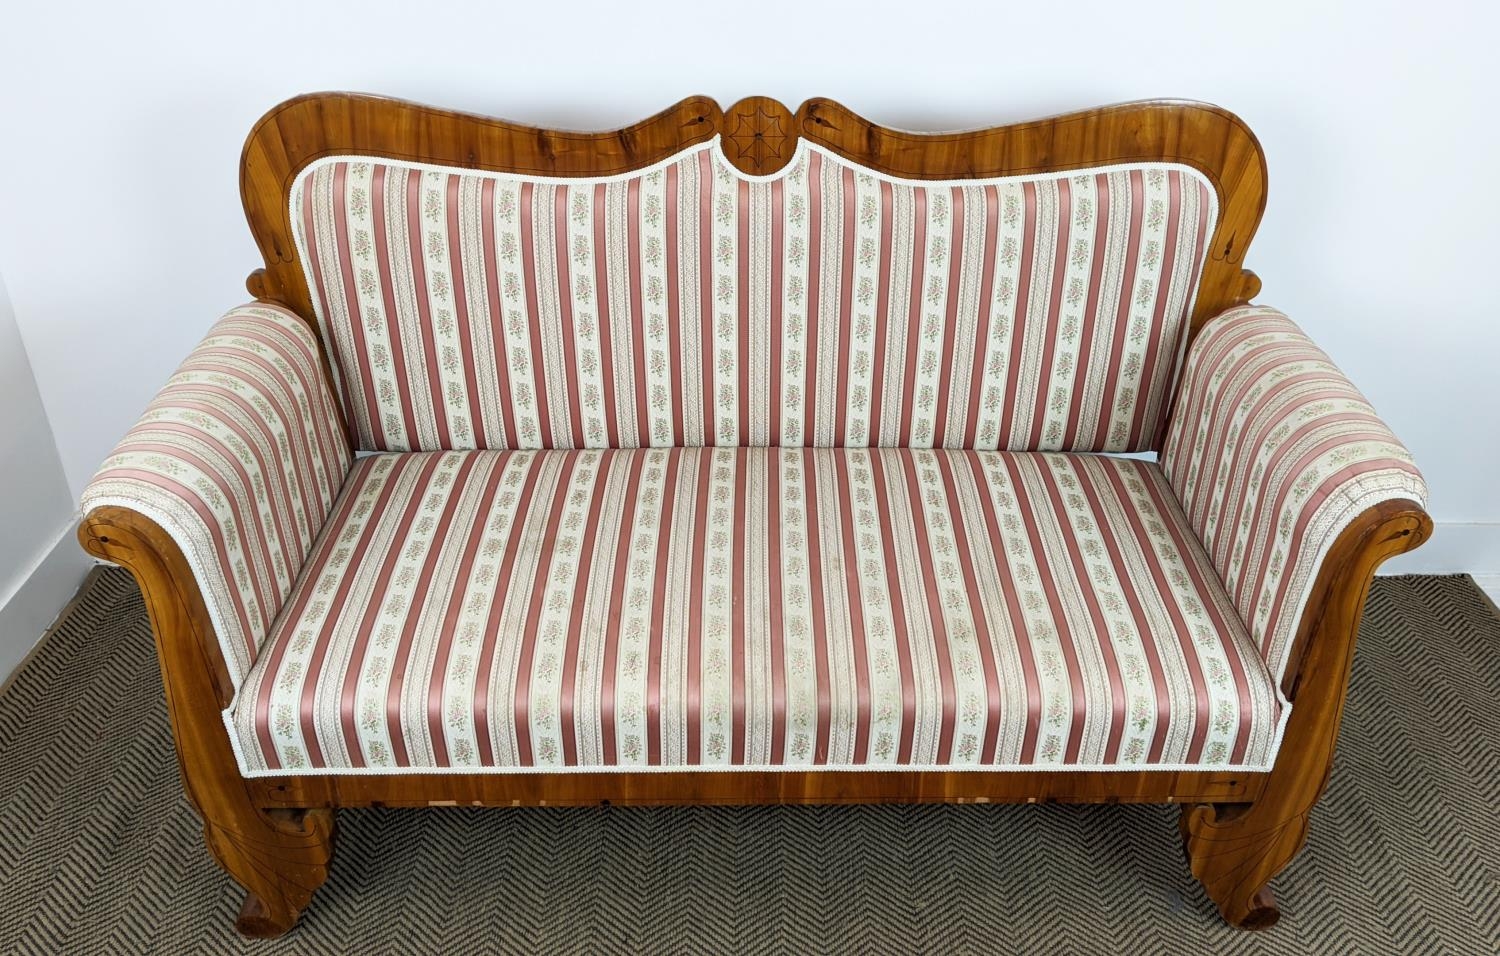 SOFA, Biedermeier cherrywood and line inlaid with pink striped upholstery, 104cm H x 168cm x 68cm. - Image 5 of 24